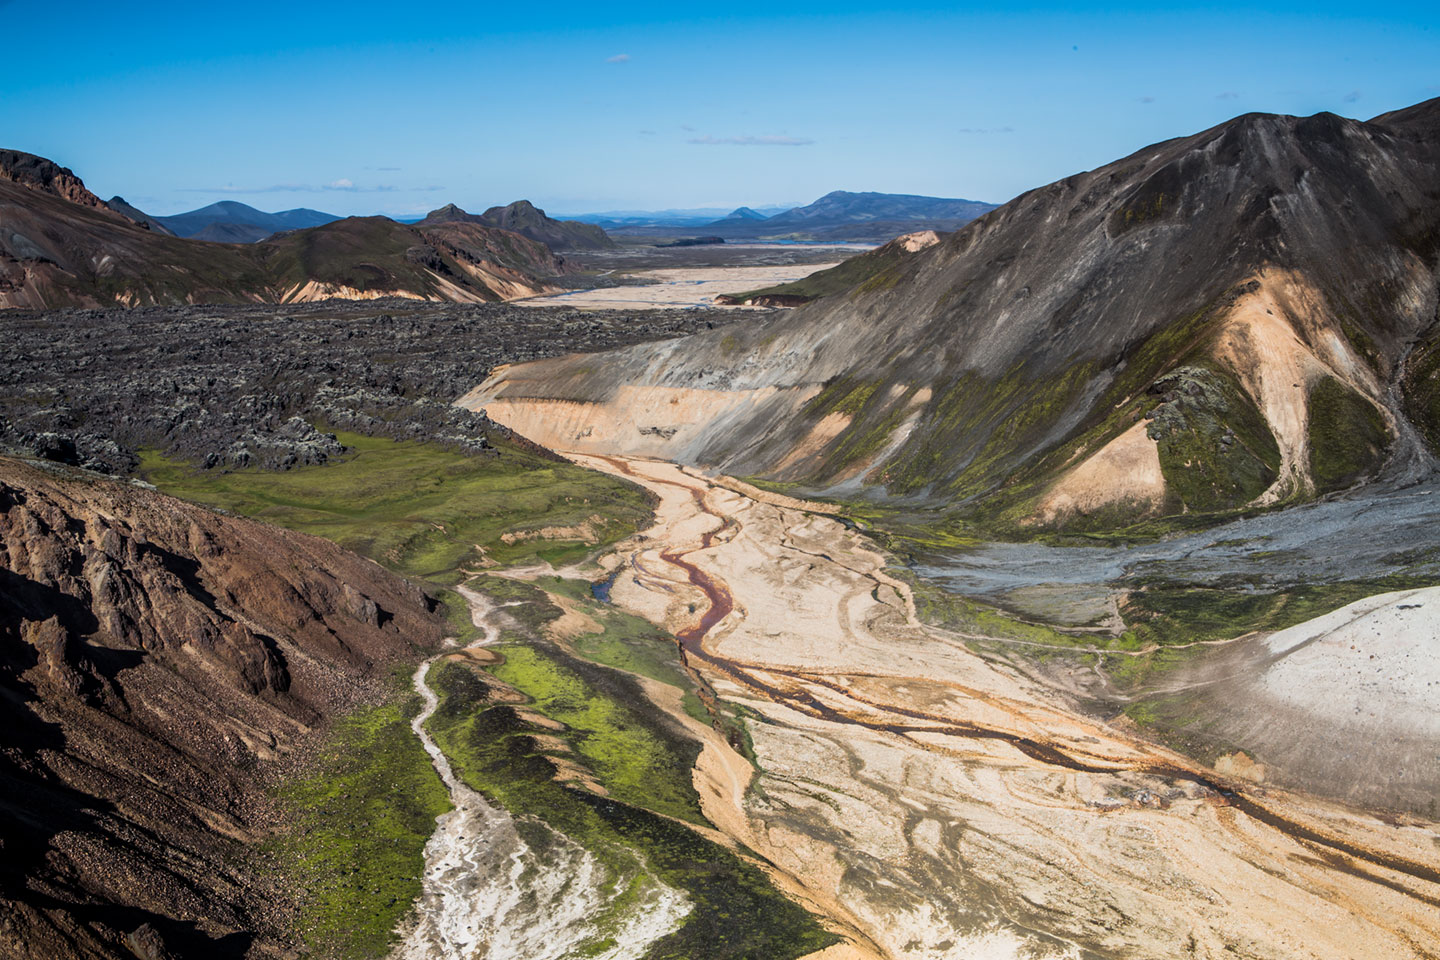 View over Landmannalaugar in Iceland during a travel photography trip